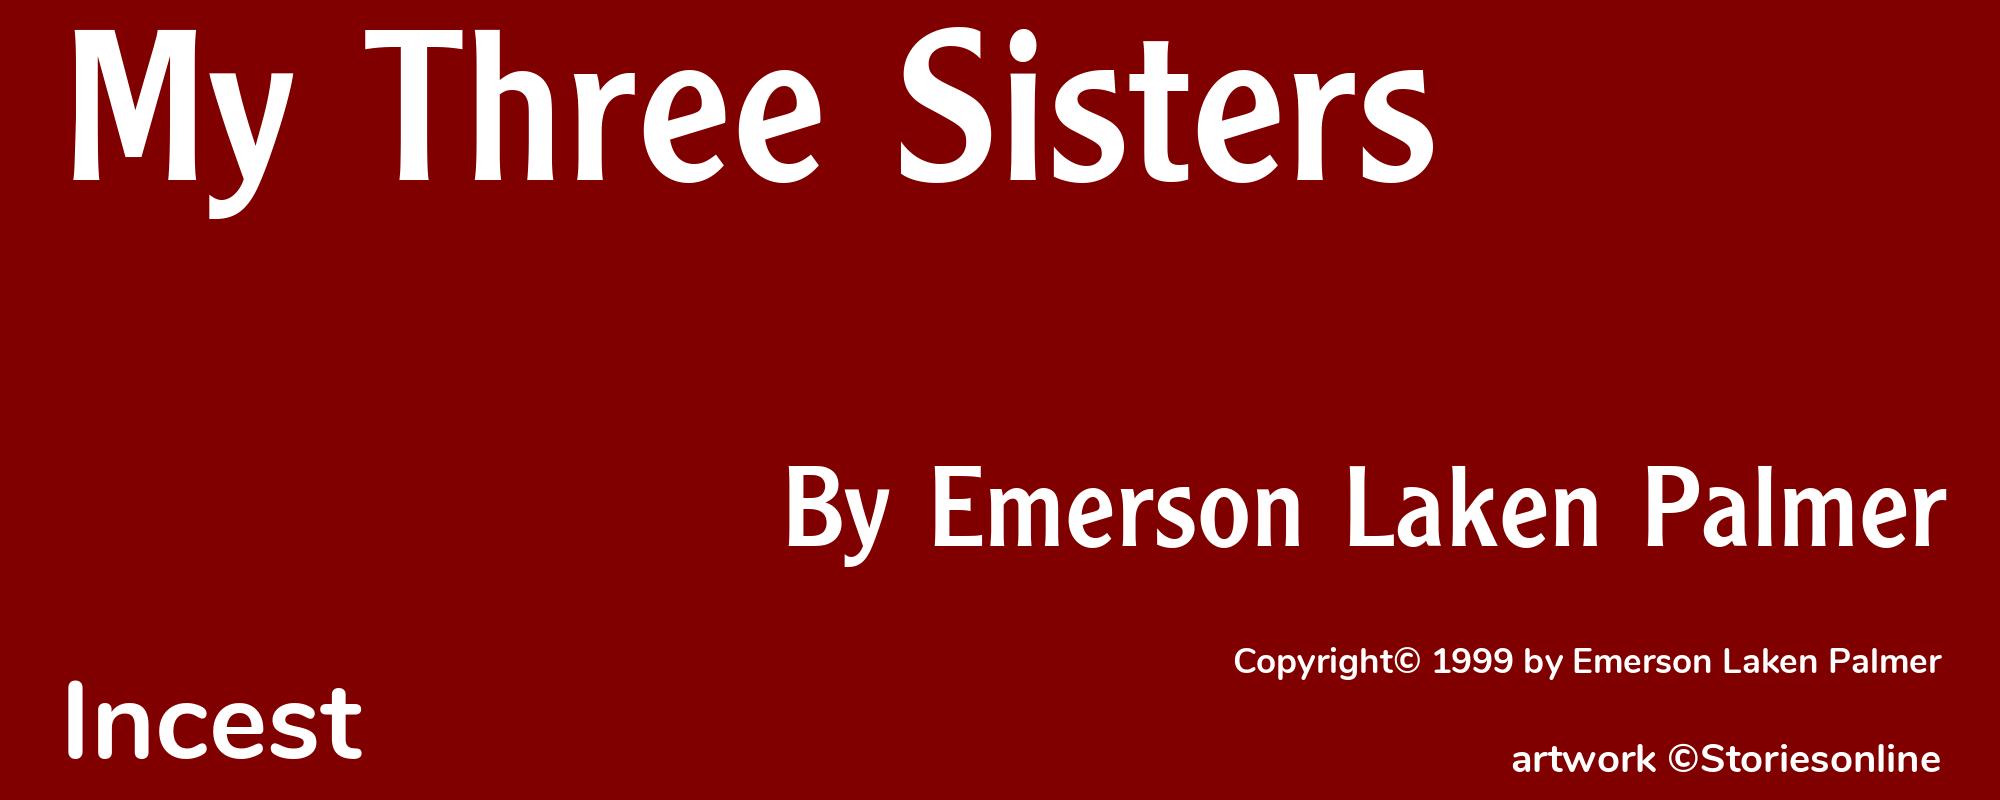 My Three Sisters - Cover